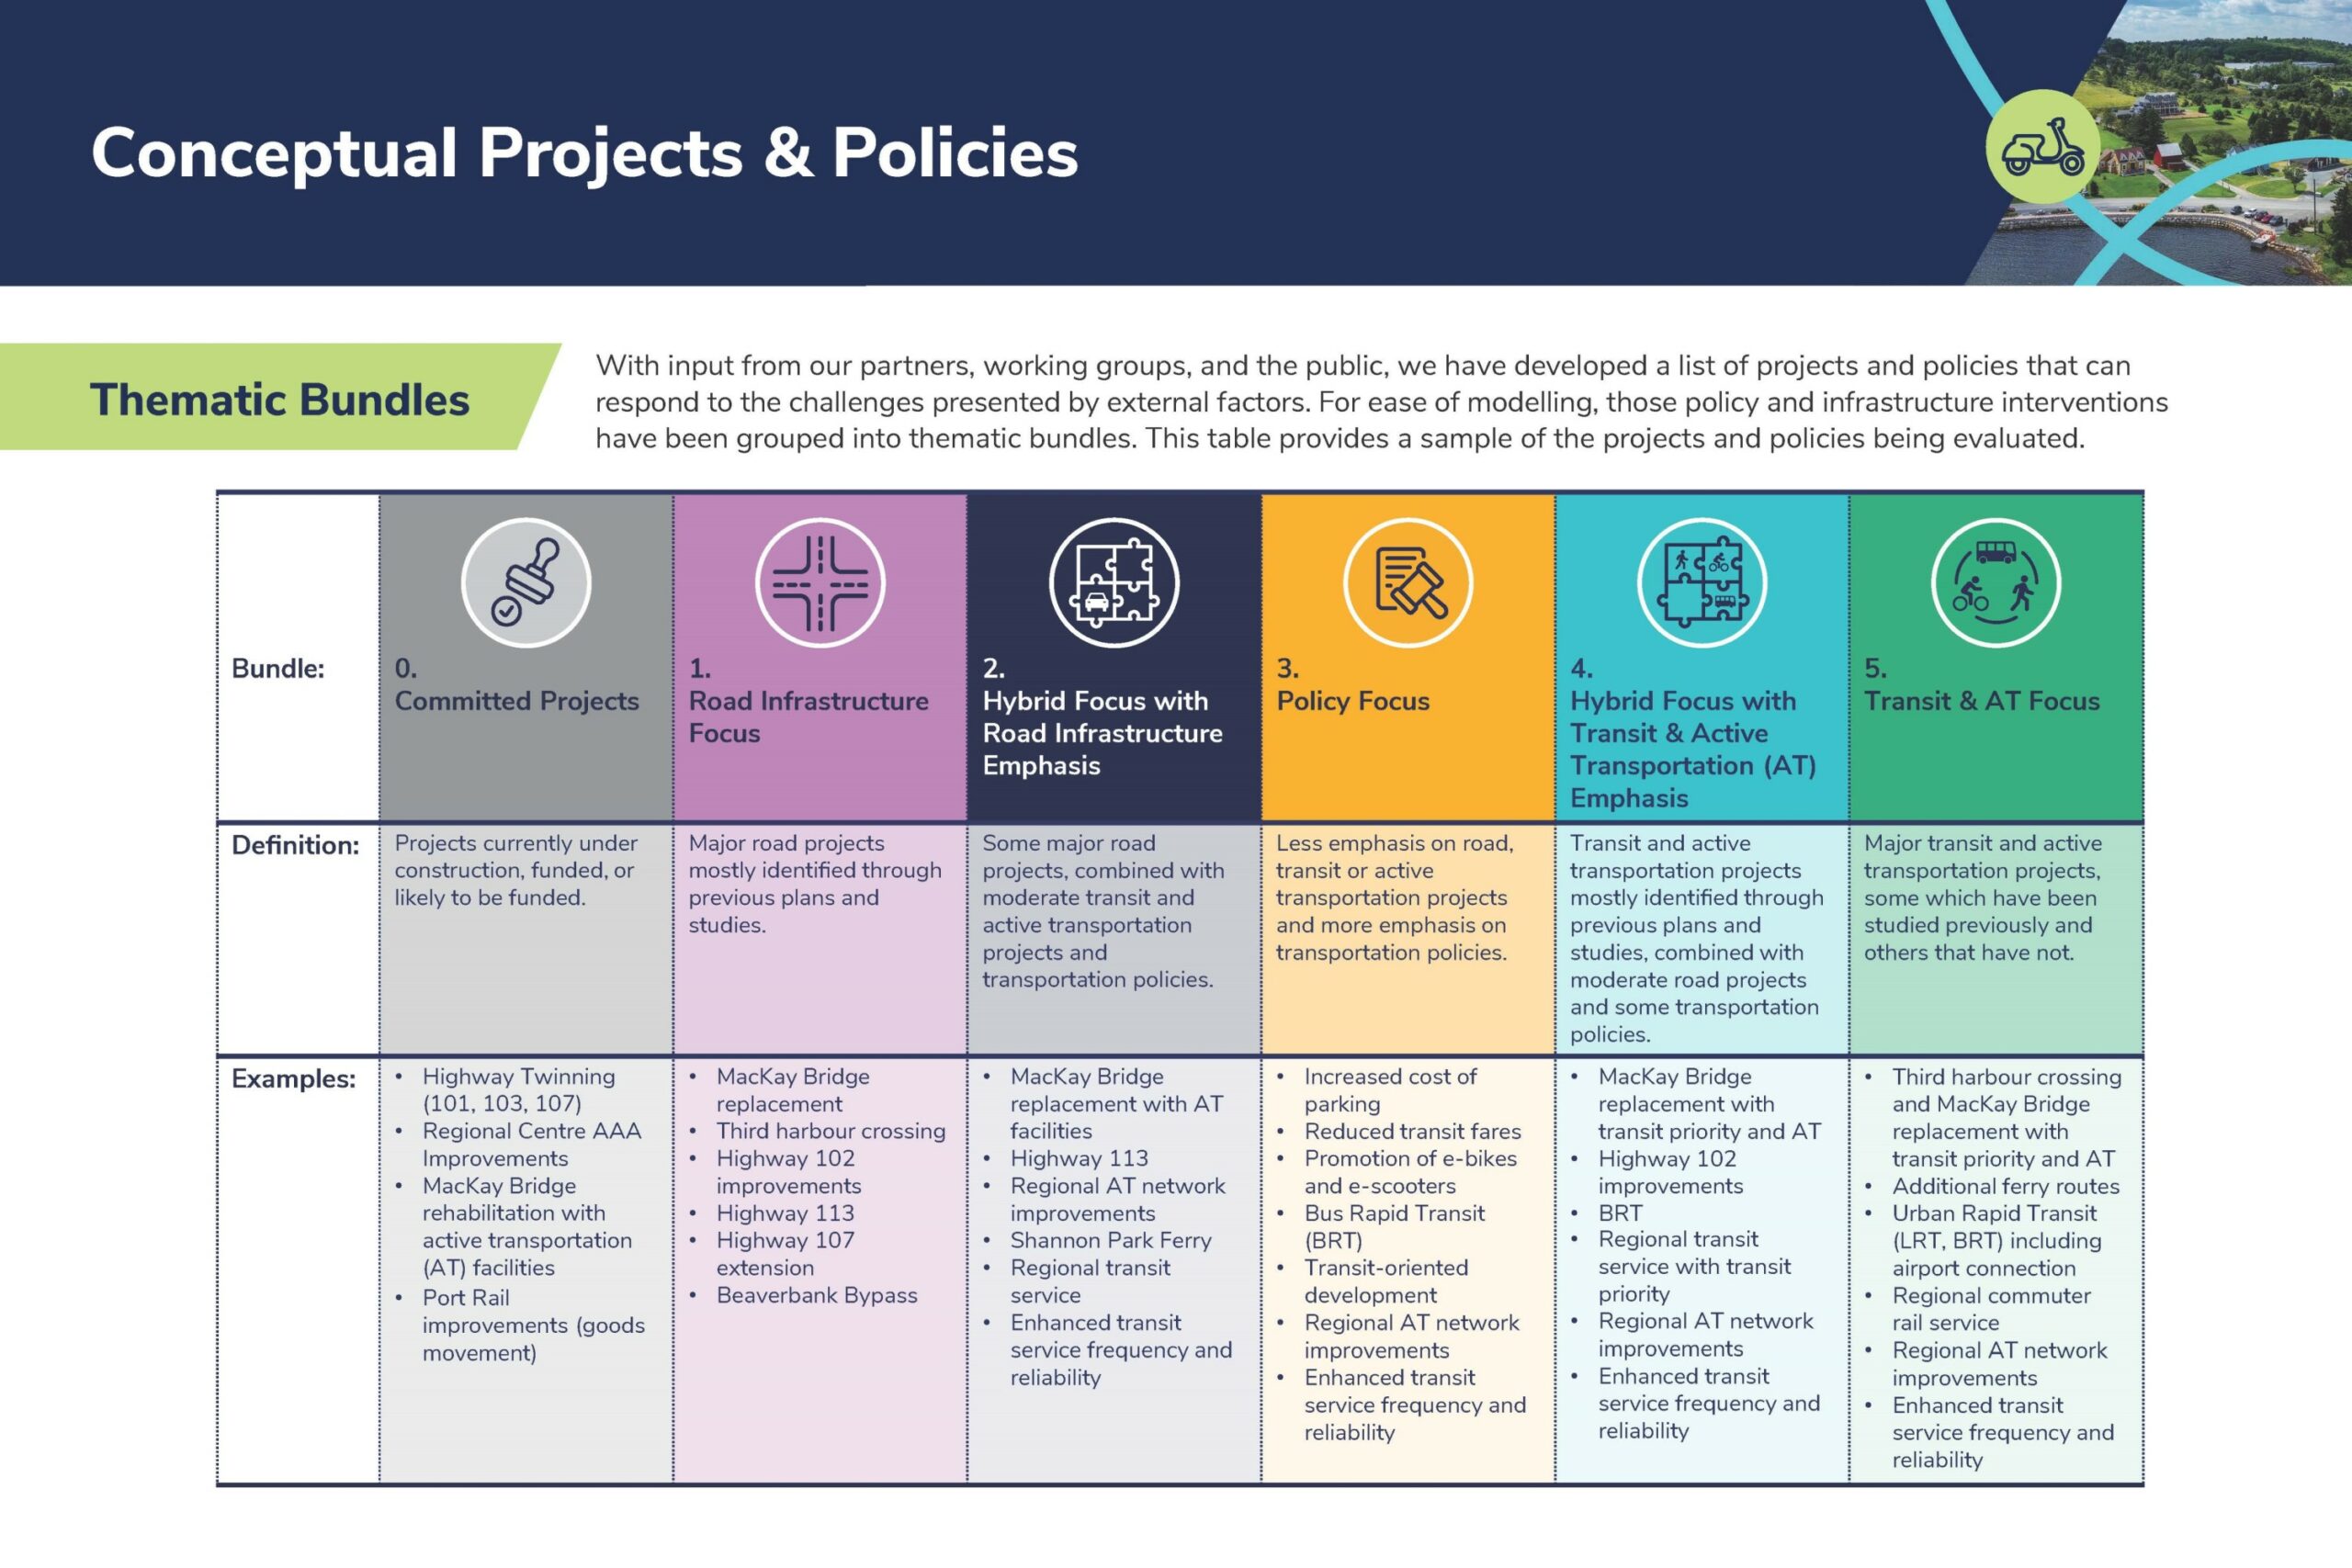 Conceptual Projects & Policies Thematic Bundles With input from our partners, working groups, and the public, we have developed a list of projects and policies that can respond to the challenges presented by external factors. For ease of modelling, those projects and policies have been grouped into thematic bundles. This table provides a sample of the projects and policies being evaluated. 0. Committed Projects Projects currently under construction, funded, or likely to be funded. Highway Twinning (101, 103, 107) Regional Centre AAA Improvements MacKay Bridge rehabilitation with active transportation (AT) facilities Port Rail improvements (goods movement) 1. Road Infrastructure Focus Major road projects mostly identified through previous plans and studies. MacKay Bridge replacement Third harbour crossing Highway 102 improvements Highway 113 Highway 107 extension Beaverbank Bypass 2. Hybrid Focus with Road Infrastructure Emphasis Some major road projects, combined with moderate transit and active transportation projects and transportation policies. MacKay Bridge replacement with AT facilities Highway 113 Regional AT network improvements Shannon Park Ferry Regional transit service Enhanced transit service frequency and reliability 3. Policy Focus Less emphasis on road, transit or active transportation projects and more emphasis on transportation policies. Increased cost of parking Reduced transit fares Promotion of e-bikes and e-scooters Bus Rapid Transit (BRT) Transit-oriented development Regional AT network improvements Enhanced transit service frequency and reliability 4. Hybrid Focus with Transit & AT Emphasis Transit and active transportation projects mostly identified through previous plans and studies, combined with moderate road projects and some transportation policies. MacKay Bridge replacement with transit priority and AT Highway 102 improvements BRT Regional transit service with transit priority Regional AT network improvements Enhanced transit service frequency and reliability 5. Transit & AT Focus Major transit and active transportation projects, some which have been studied previously and others that have not. Third harbour crossing and MacKay Bridge replacement with transit priority and AT Additional ferry routes Urban Rapid Transit (LRT, BRT) including airport connection Regional commuter rail service Regional AT network improvements Enhanced transit service frequency and reliability